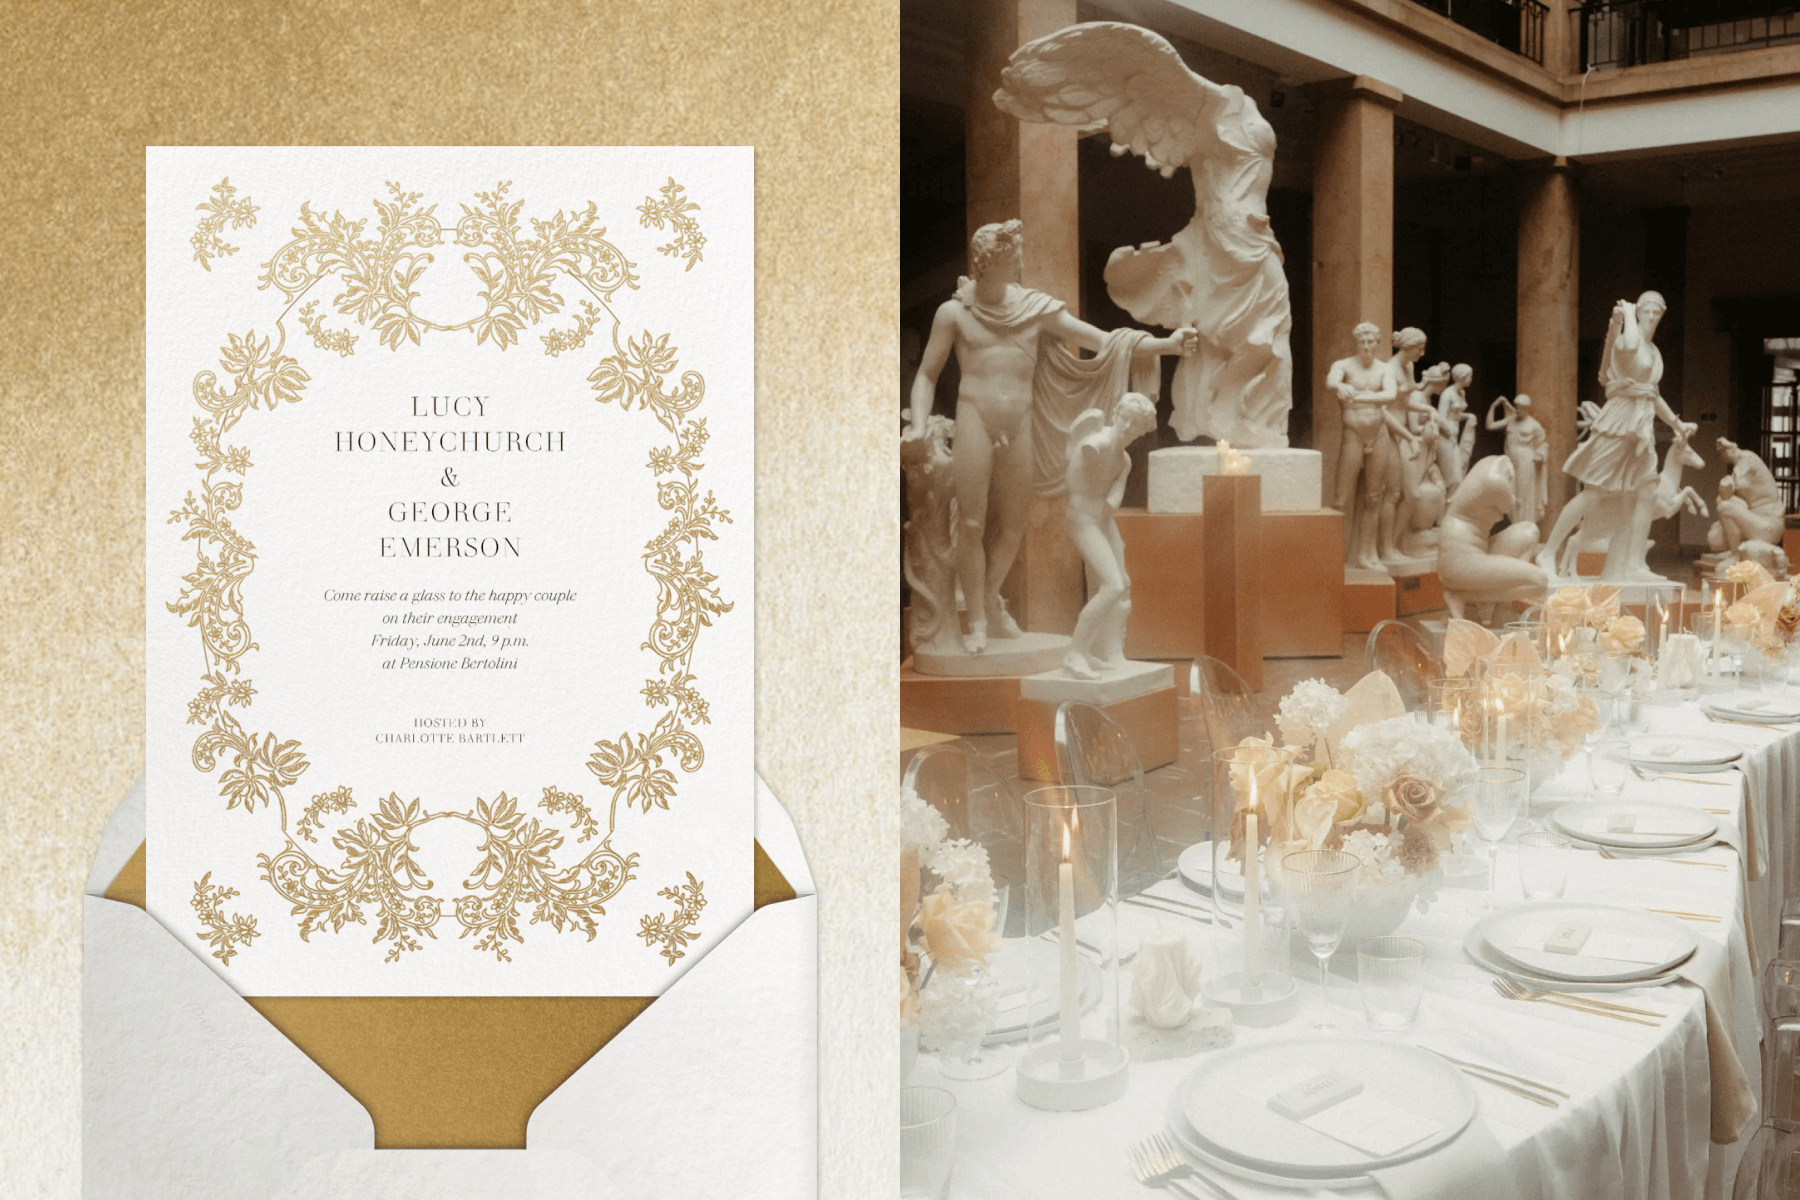 eft: An engagement party invitation with a gold lace border; Right: A winding table set amongst Roman statues.